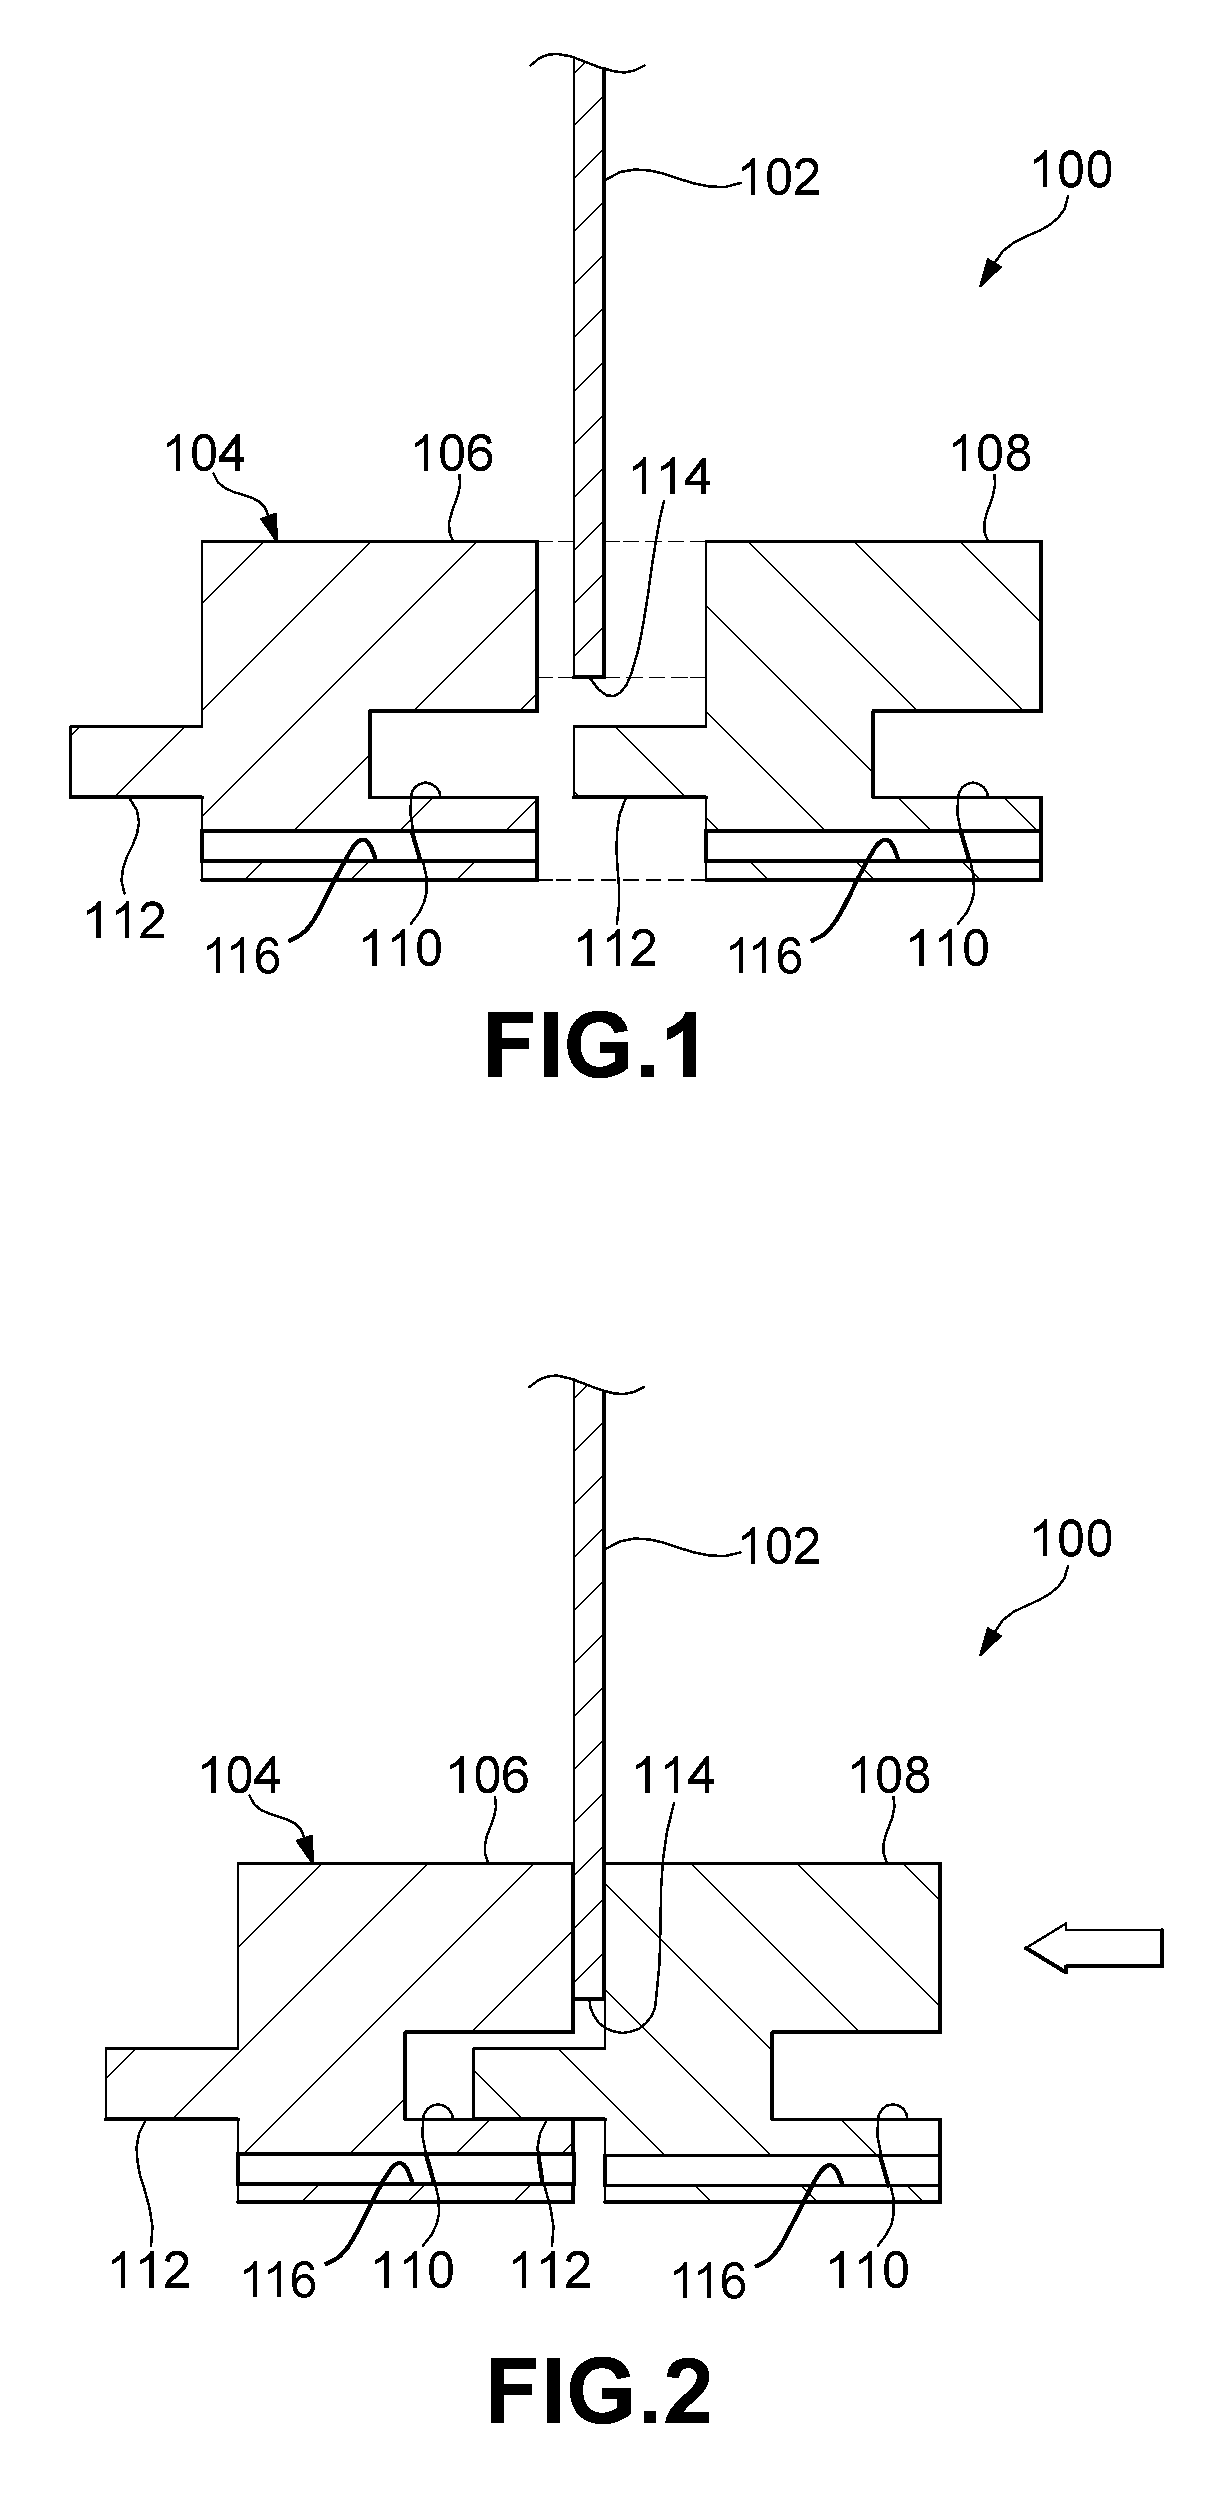 Battery cooling module foot profile design for a jointless conductive FIN/foot compressed interface connection